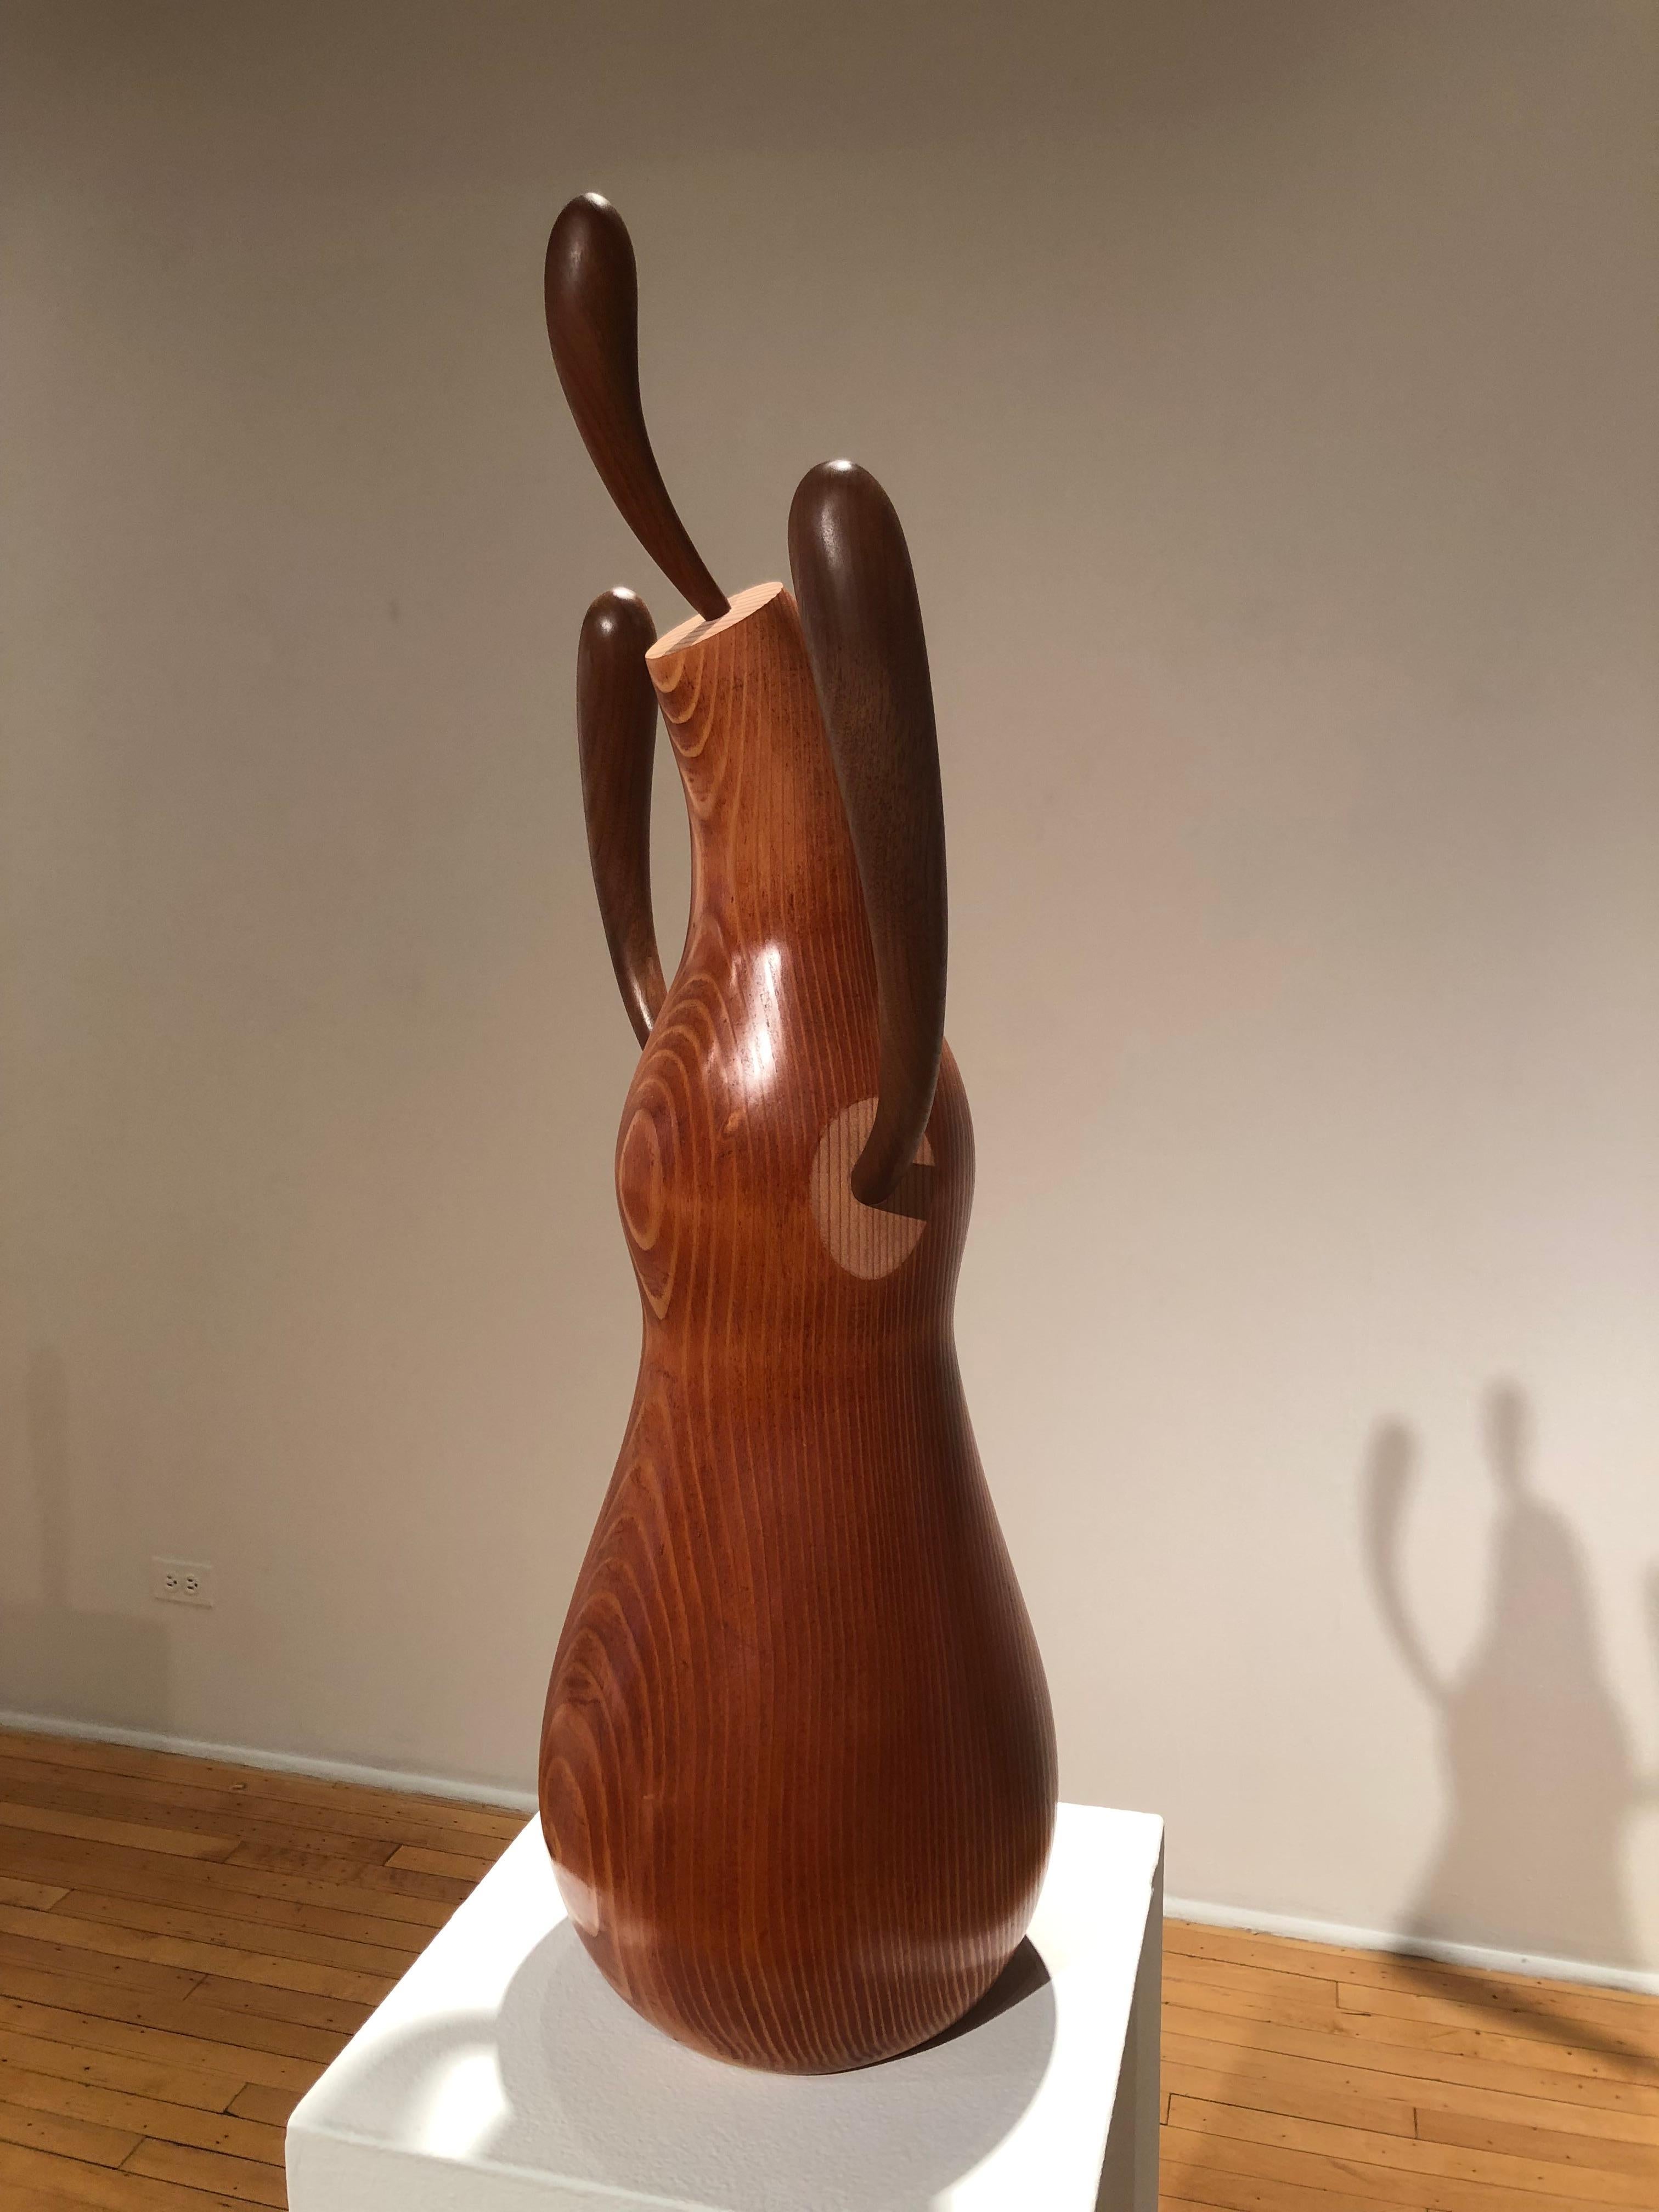 Hand carved organic abstract sculpture made using reclaimed wood. 

John Maloof, Untitled, 2018
pine and walnut

John Maloof (of Vivian Maier fame) is an artist based in Chicago. The gallery is pleased to present his new body of work in sculpture.